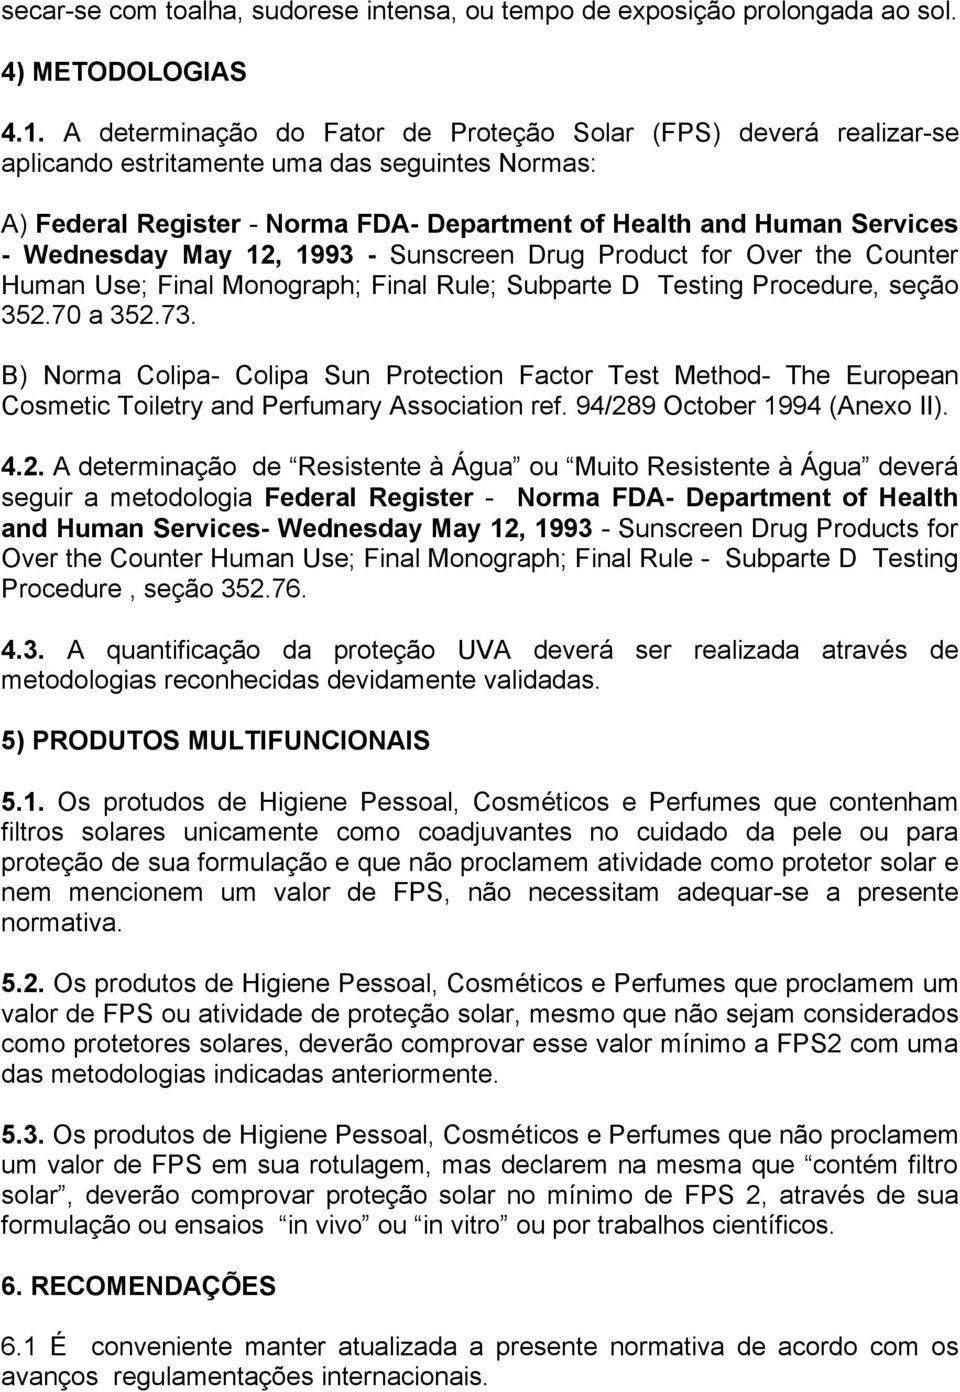 Wednesday May 12, 1993 - Sunscreen Drug Product for Over the Counter Human Use; Final Monograph; Final Rule; Subparte D Testing Procedure, seção 352.70 a 352.73.